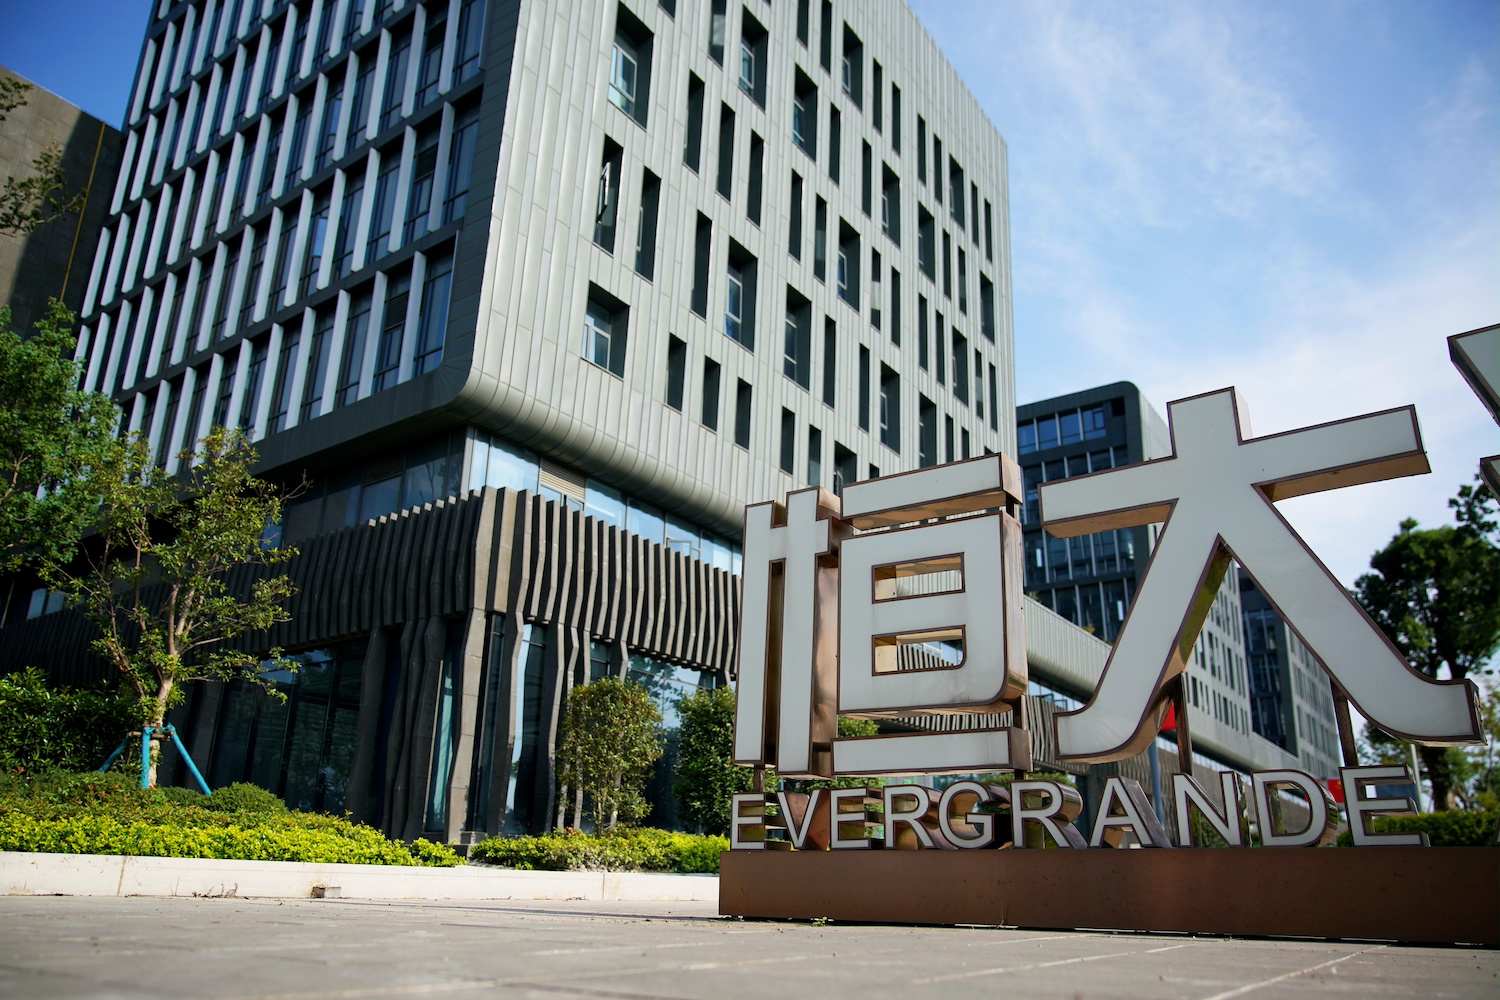 China Steps Up Funding Oversight of Evergrande Property Projects – Caixin